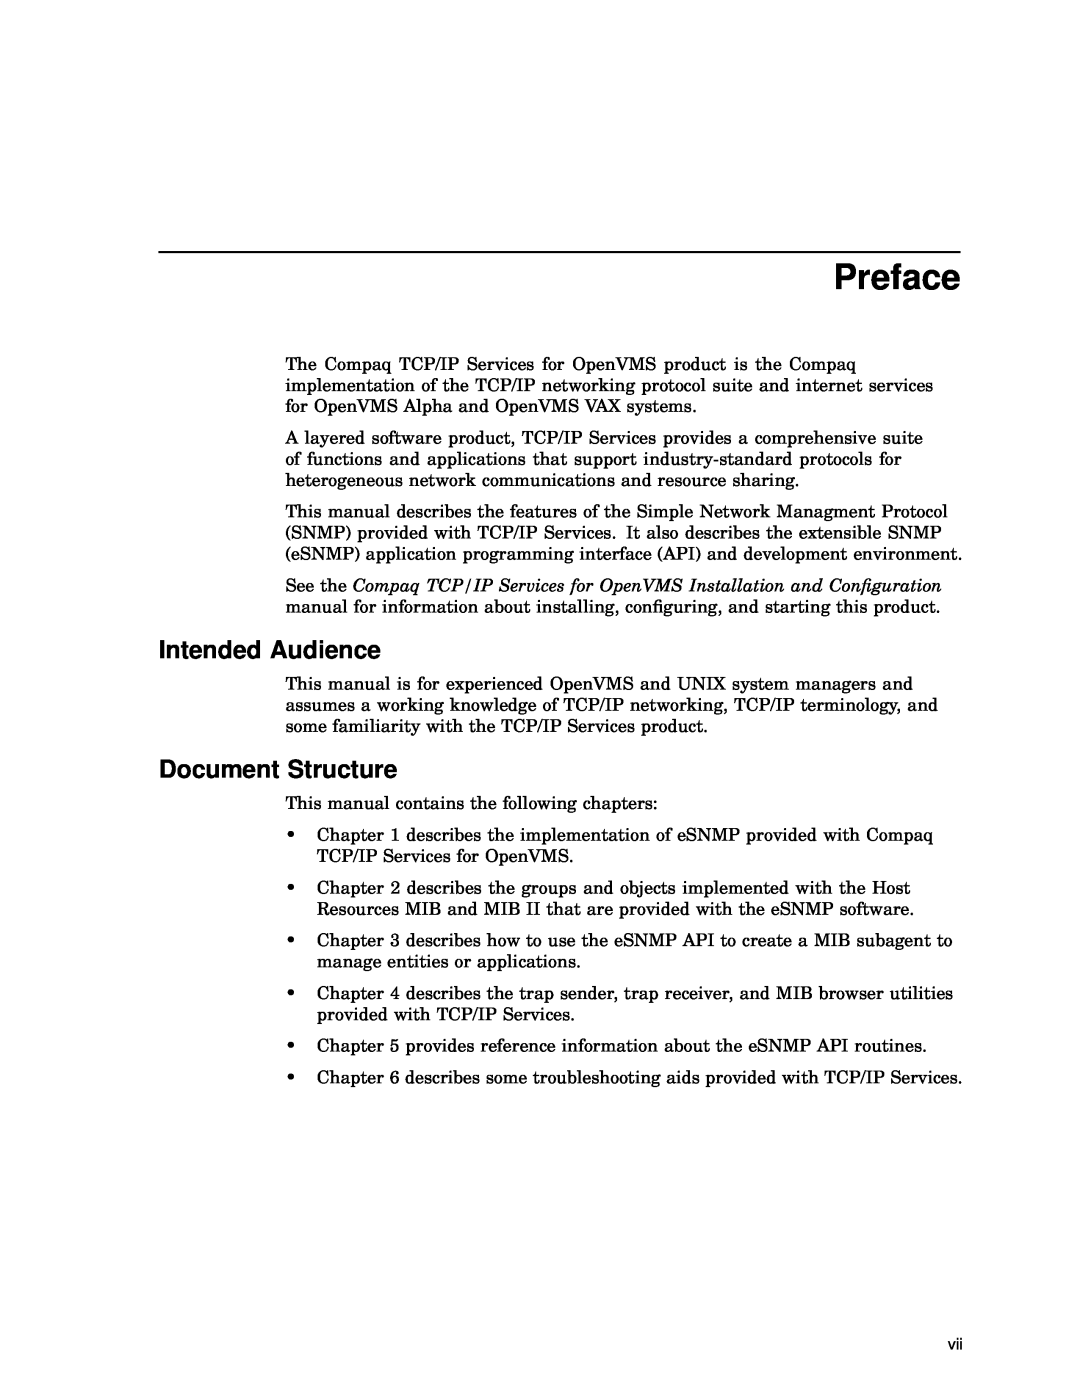 Compaq AAR04BCTE manual Preface, Intended Audience, Document Structure 